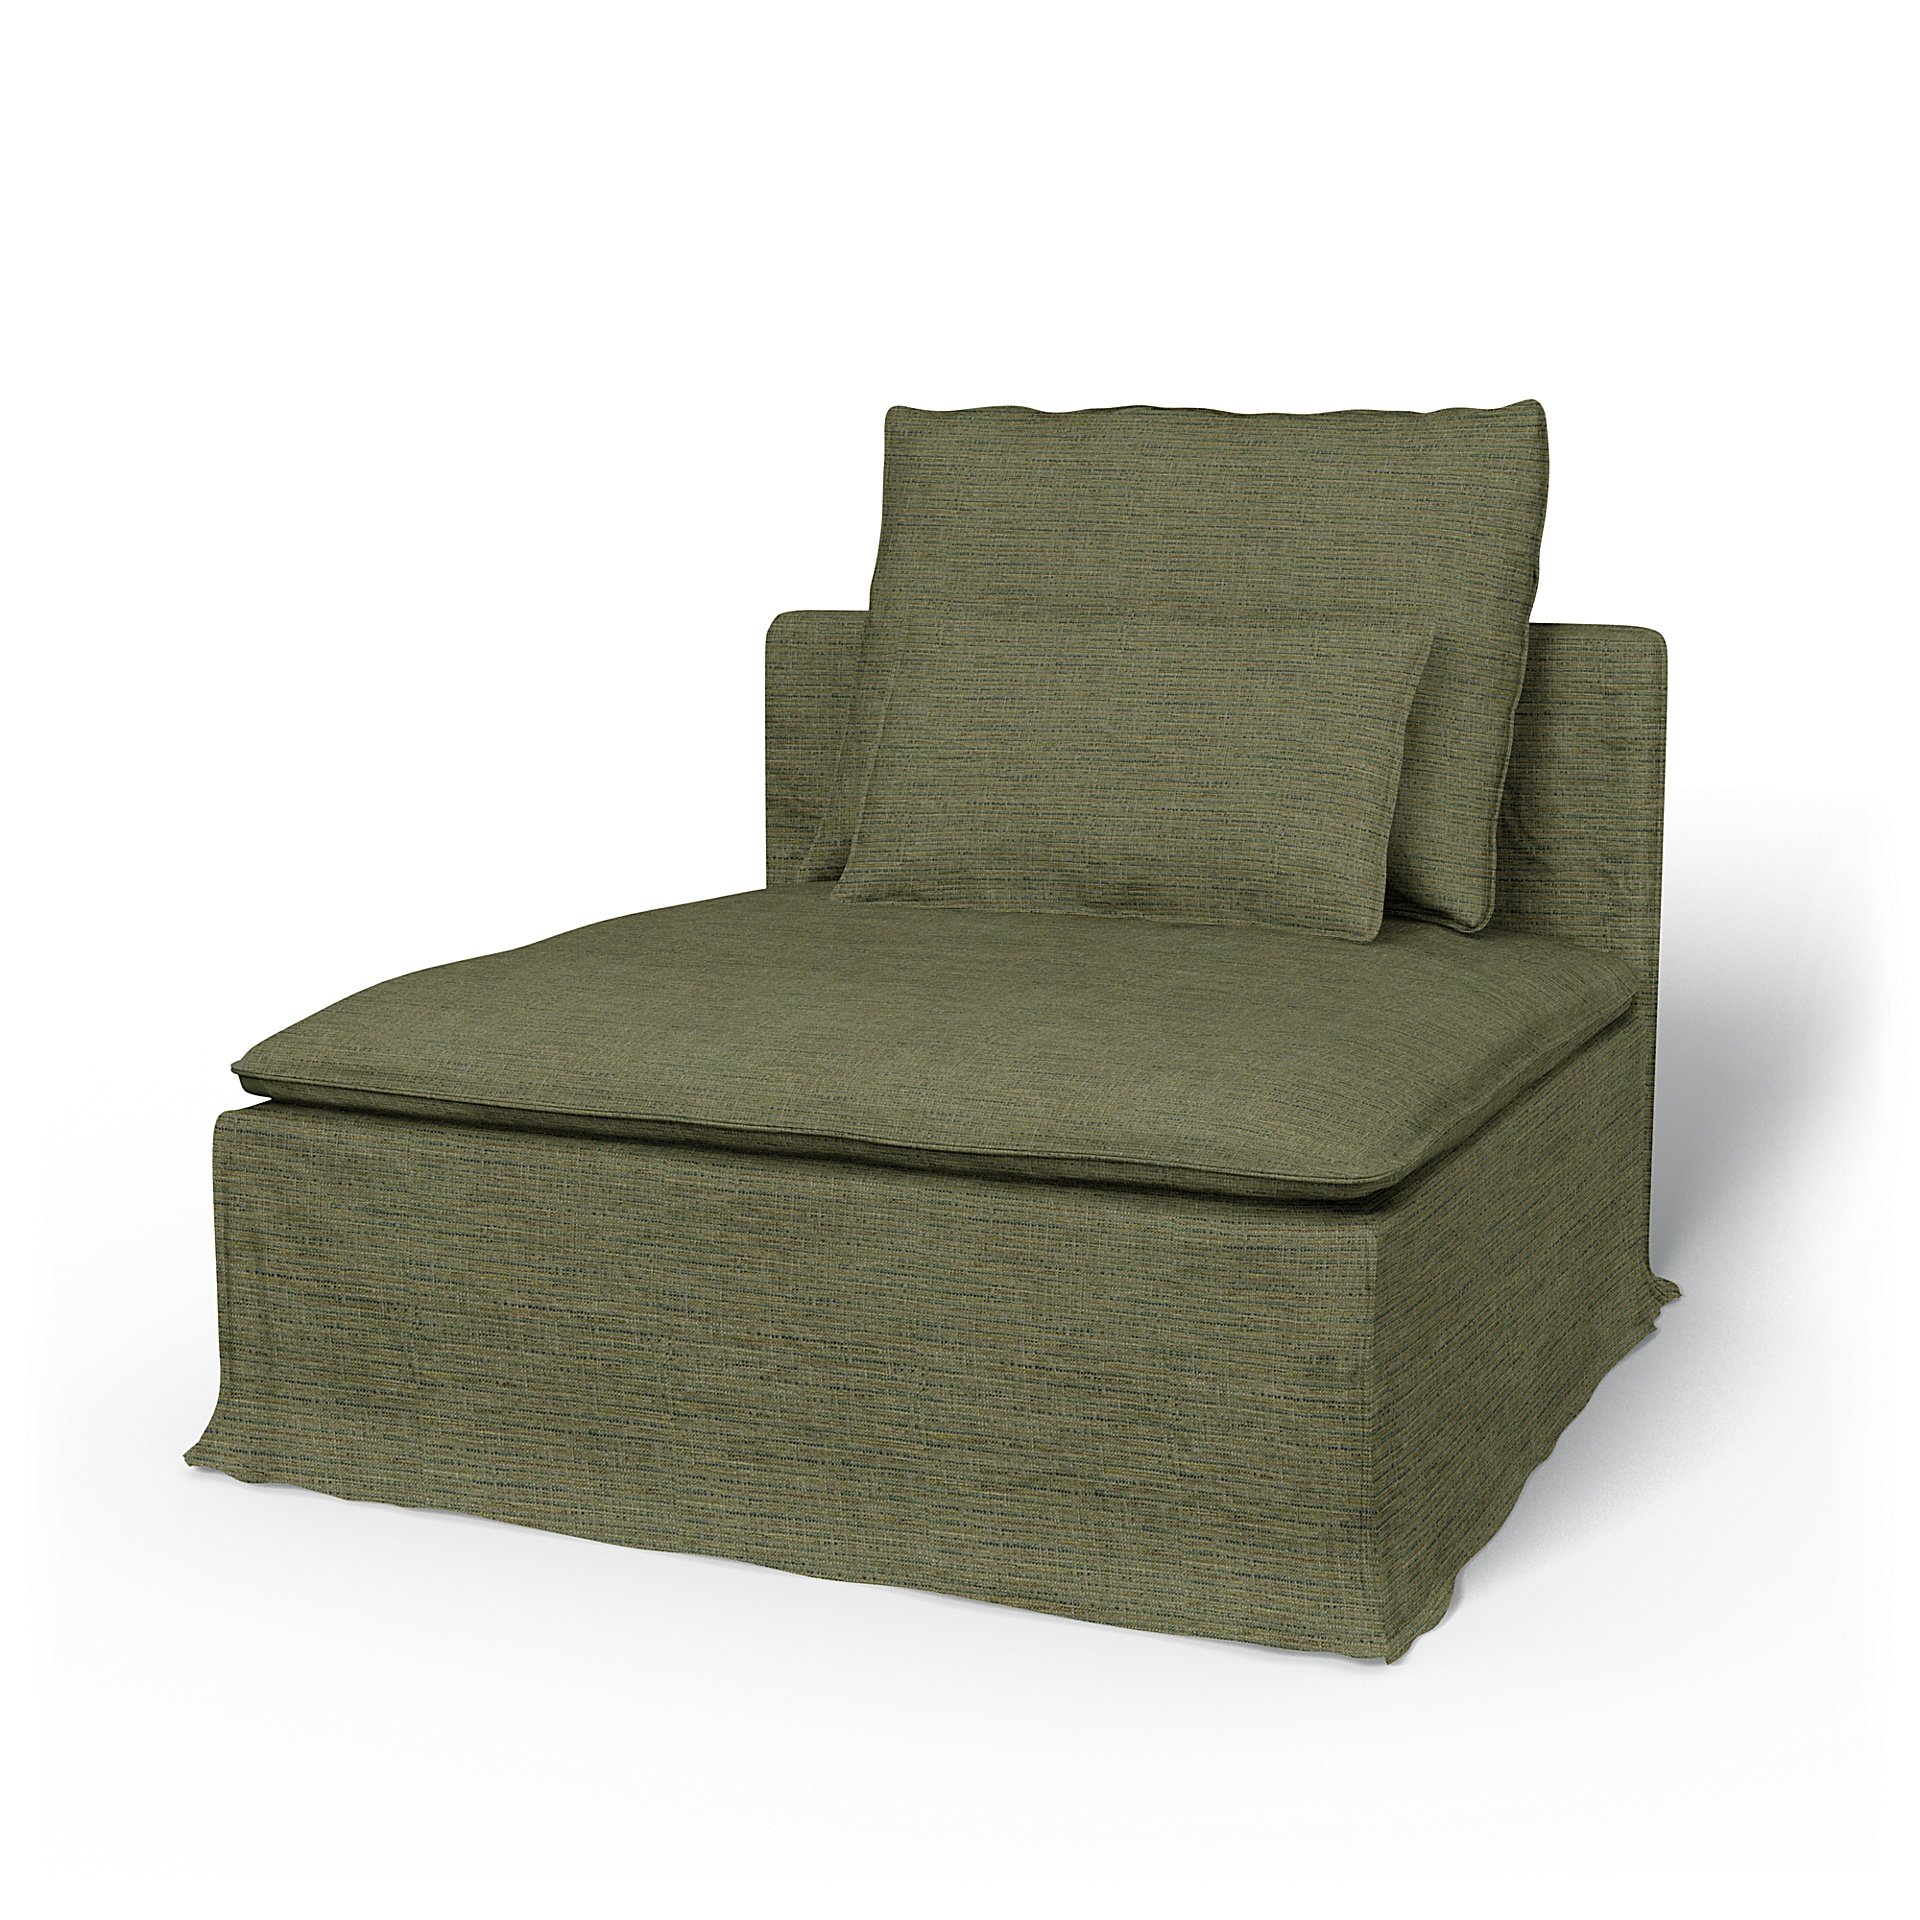 IKEA - Soderhamn 1 Seat Section Cover, Meadow Green, Boucle & Texture - Bemz